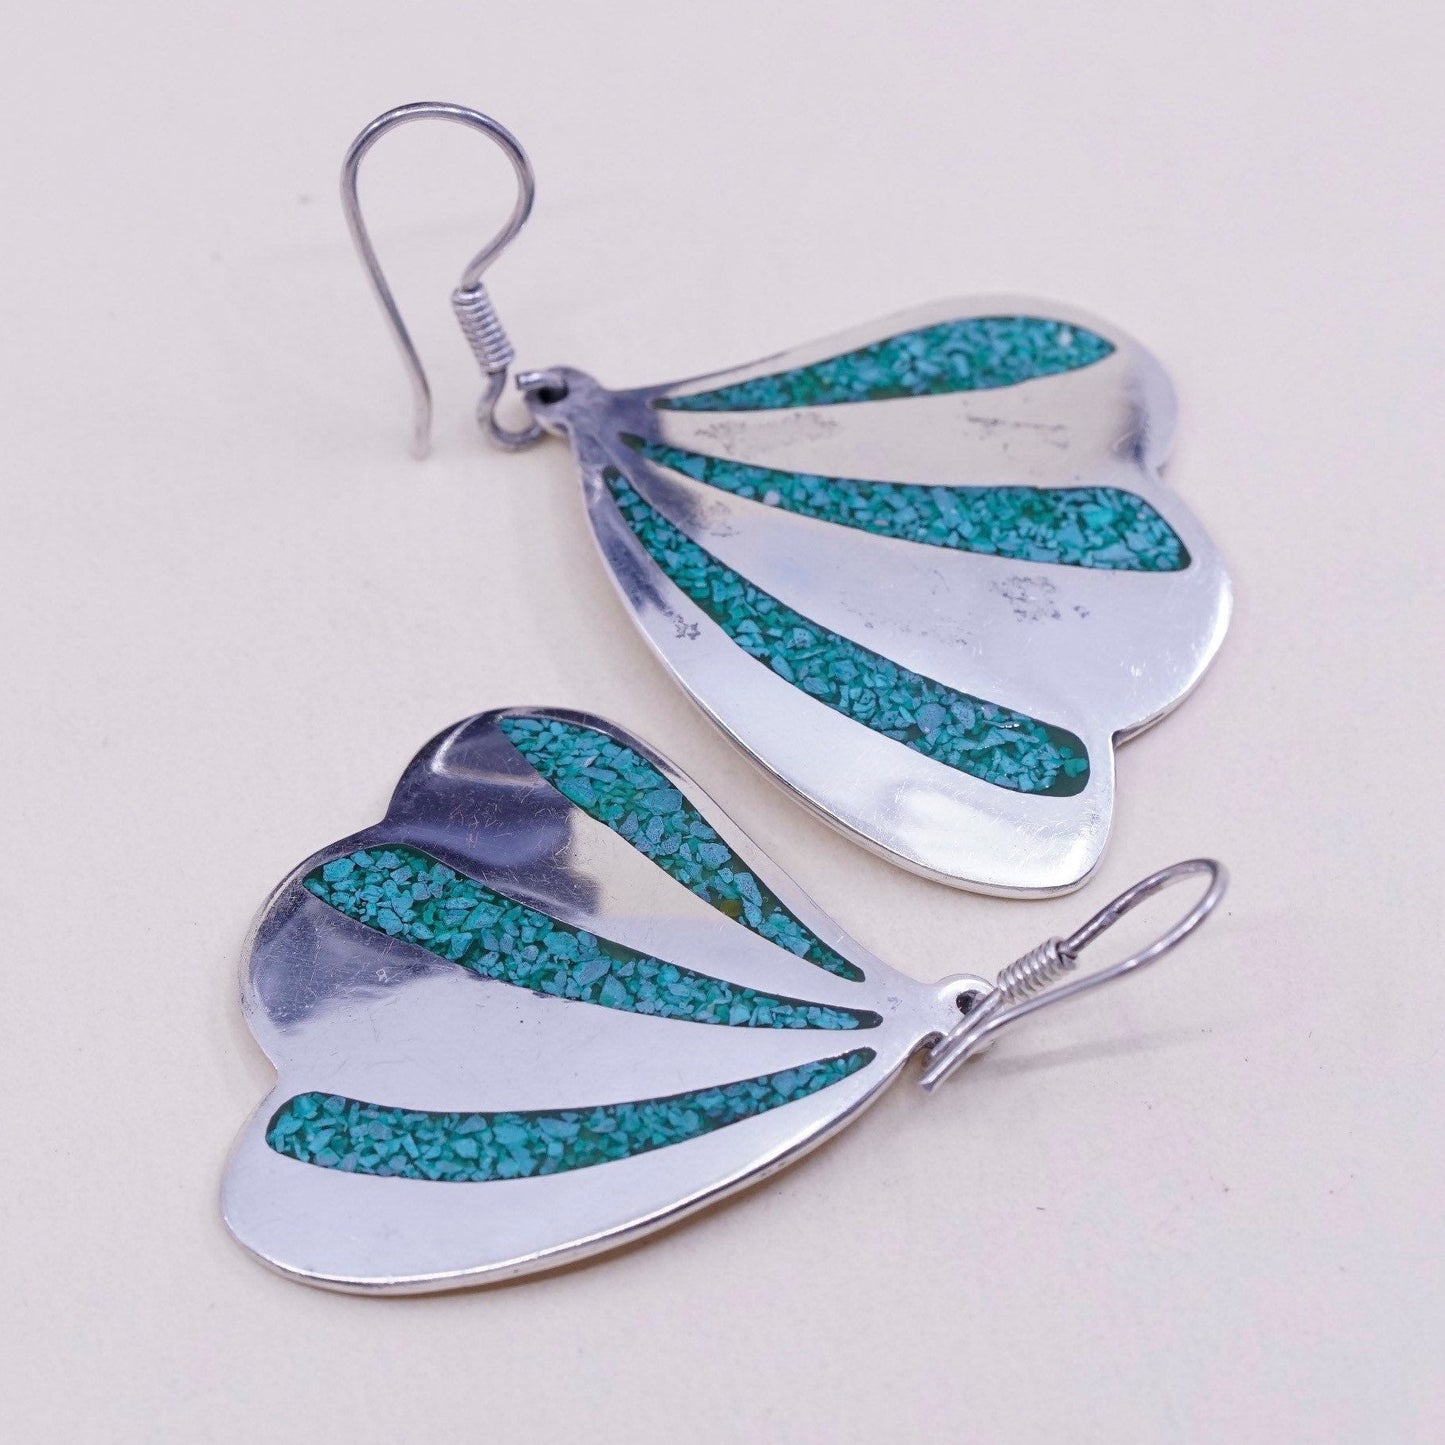 Vintage sterling 925 silver handmade earrings, mexico wings with turquoise